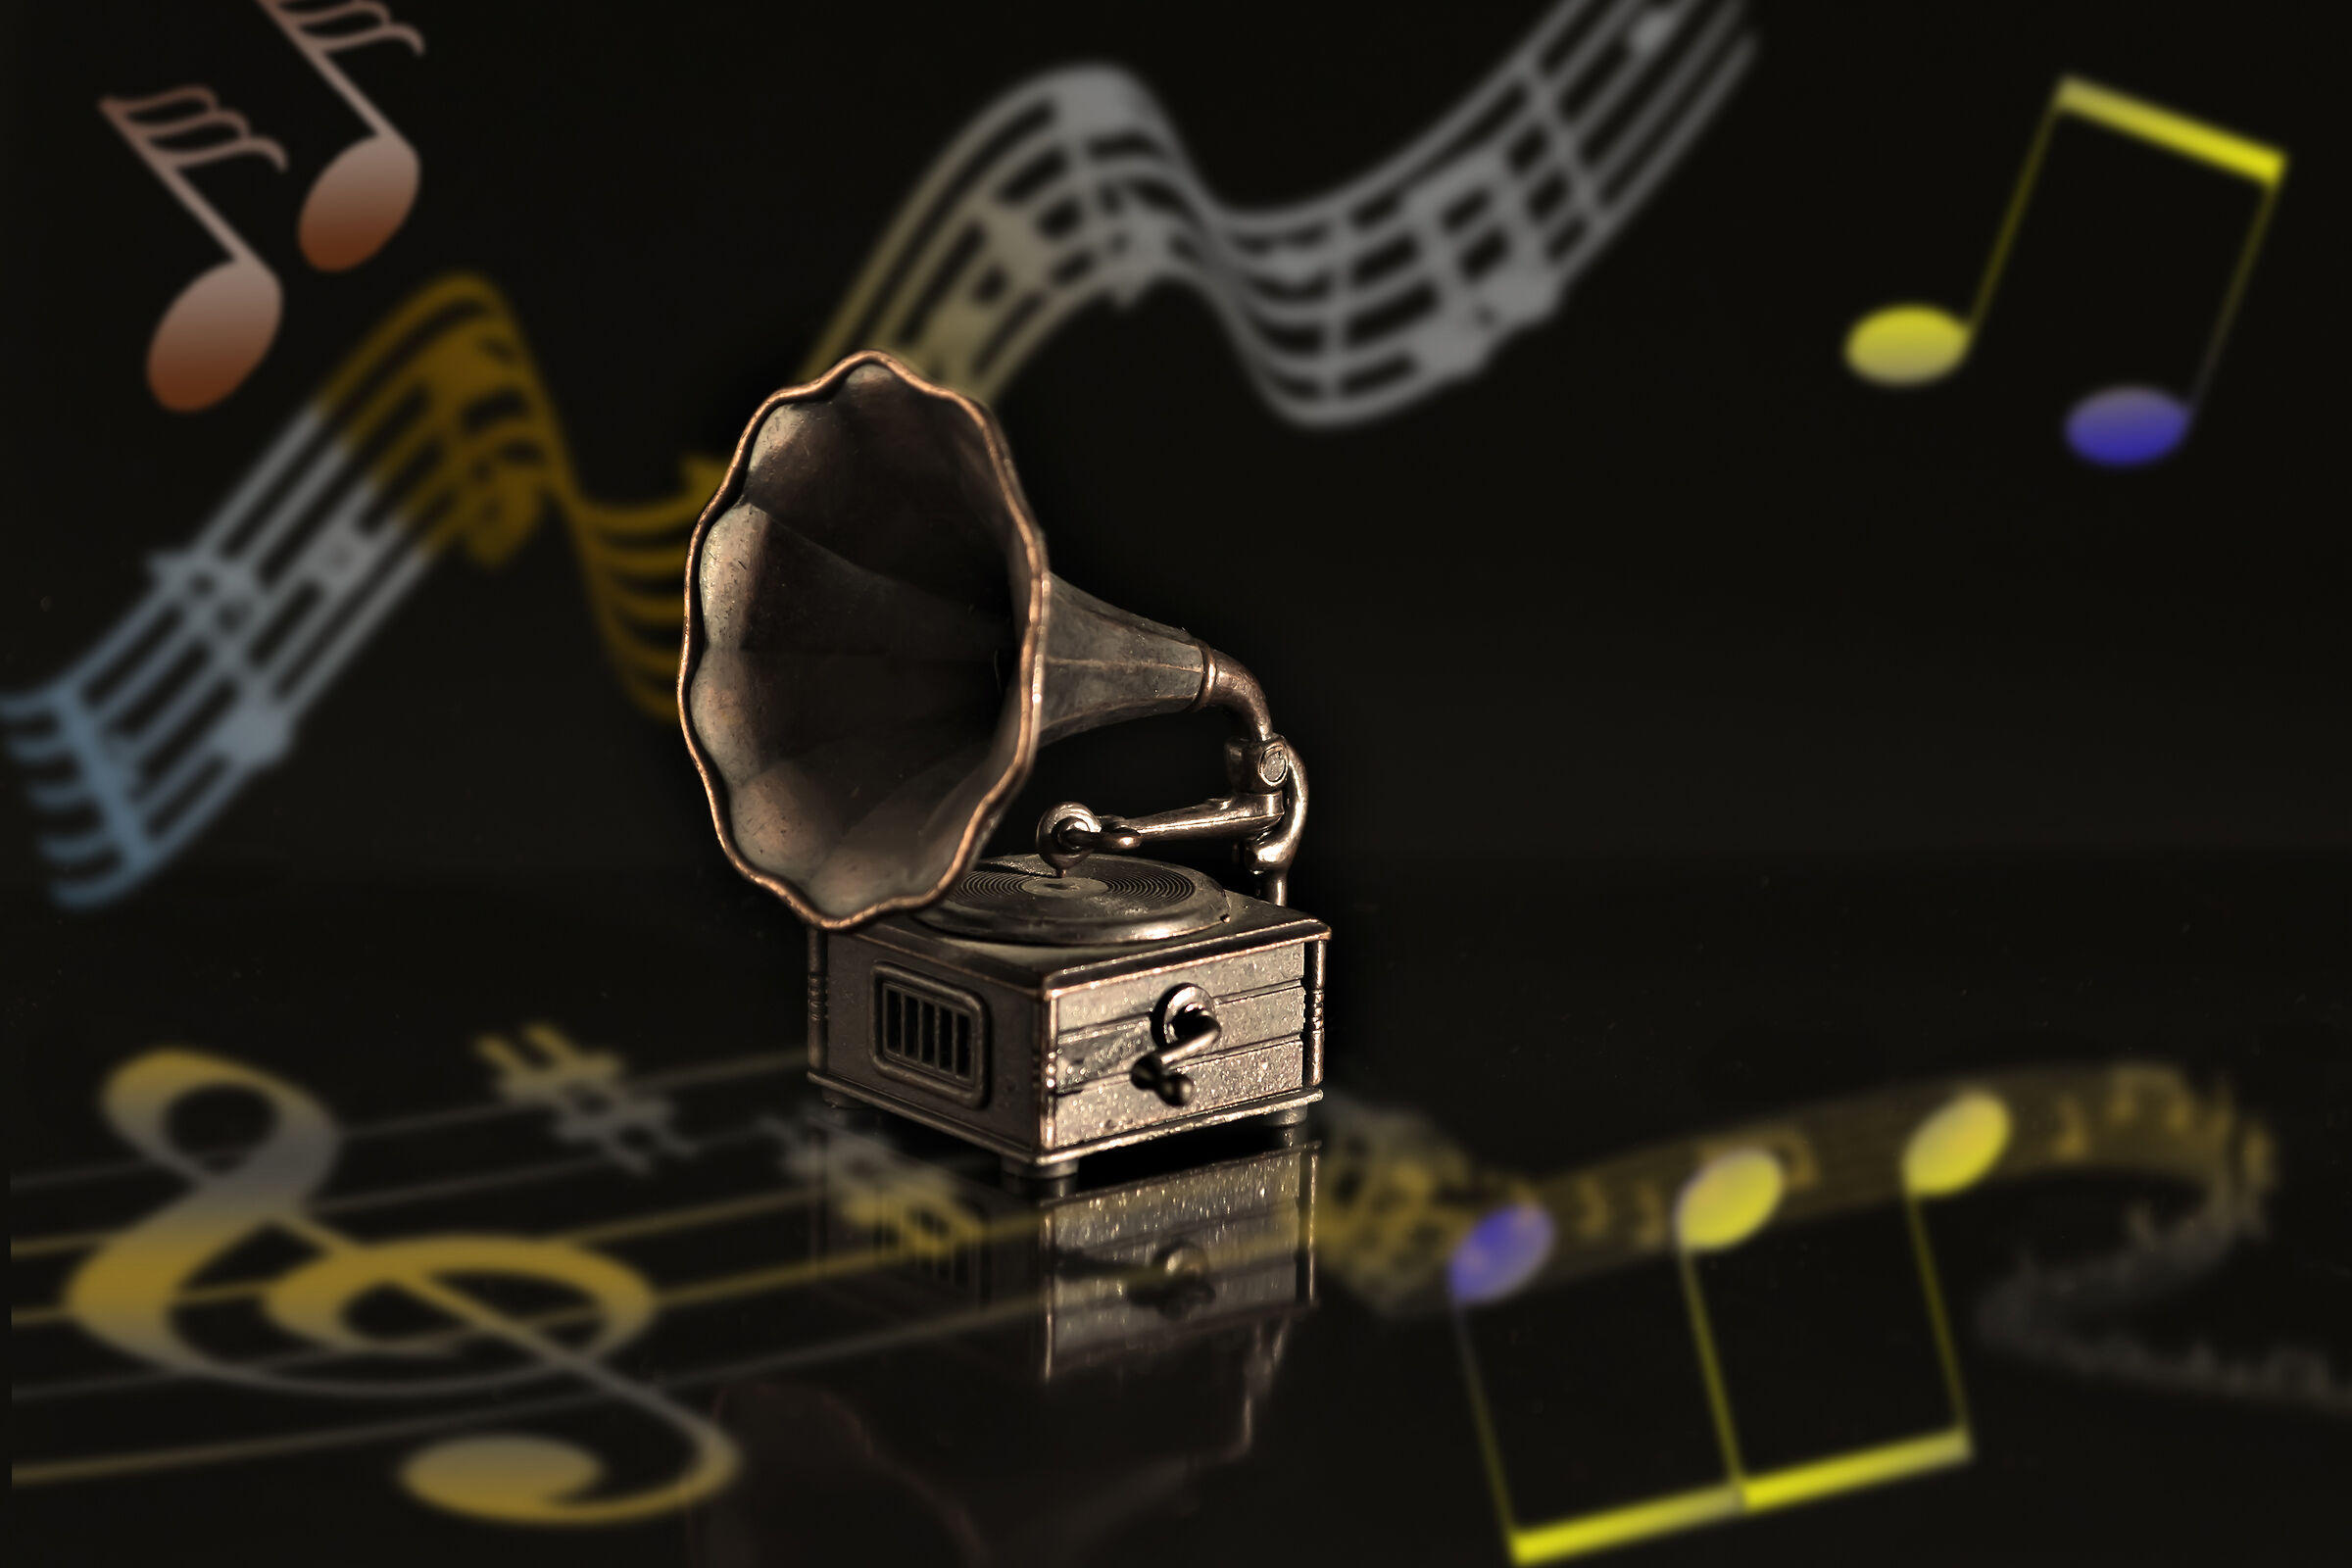 Miniature Gramophone on Black Background Editing Notes Music...